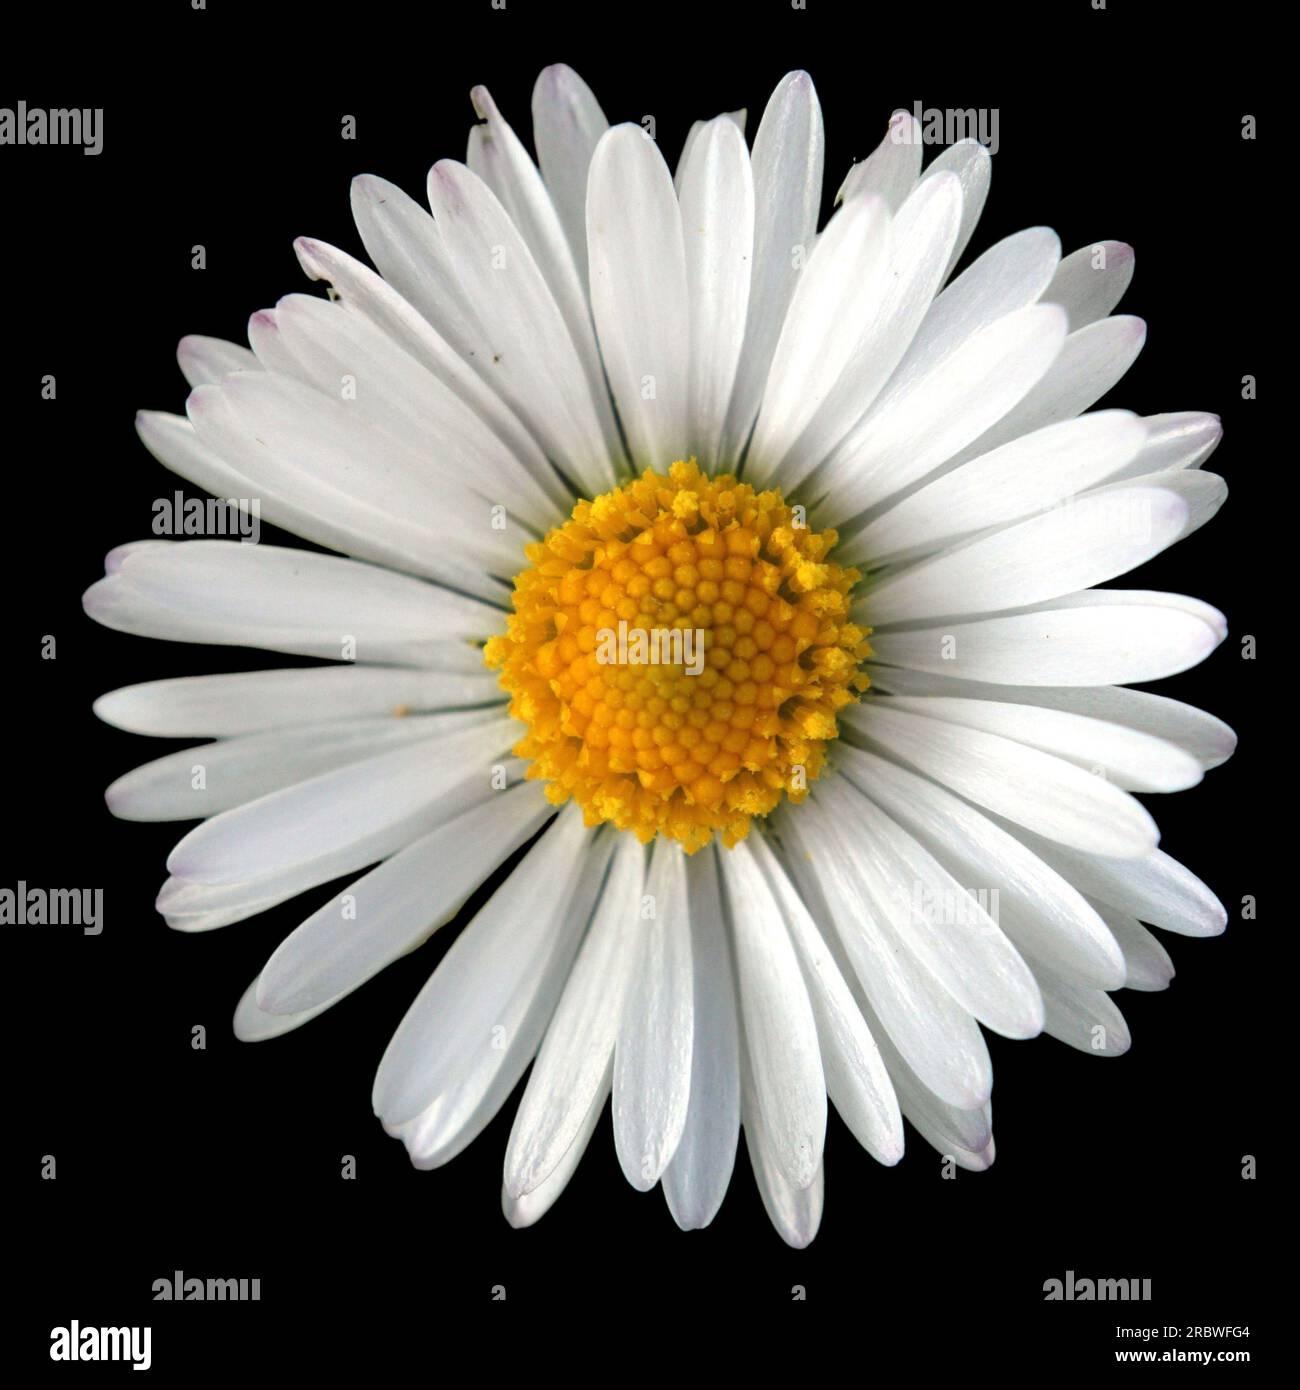 Close-up of the blossom of a daisy (Bellis perennis), isolated on black. Stock Photo